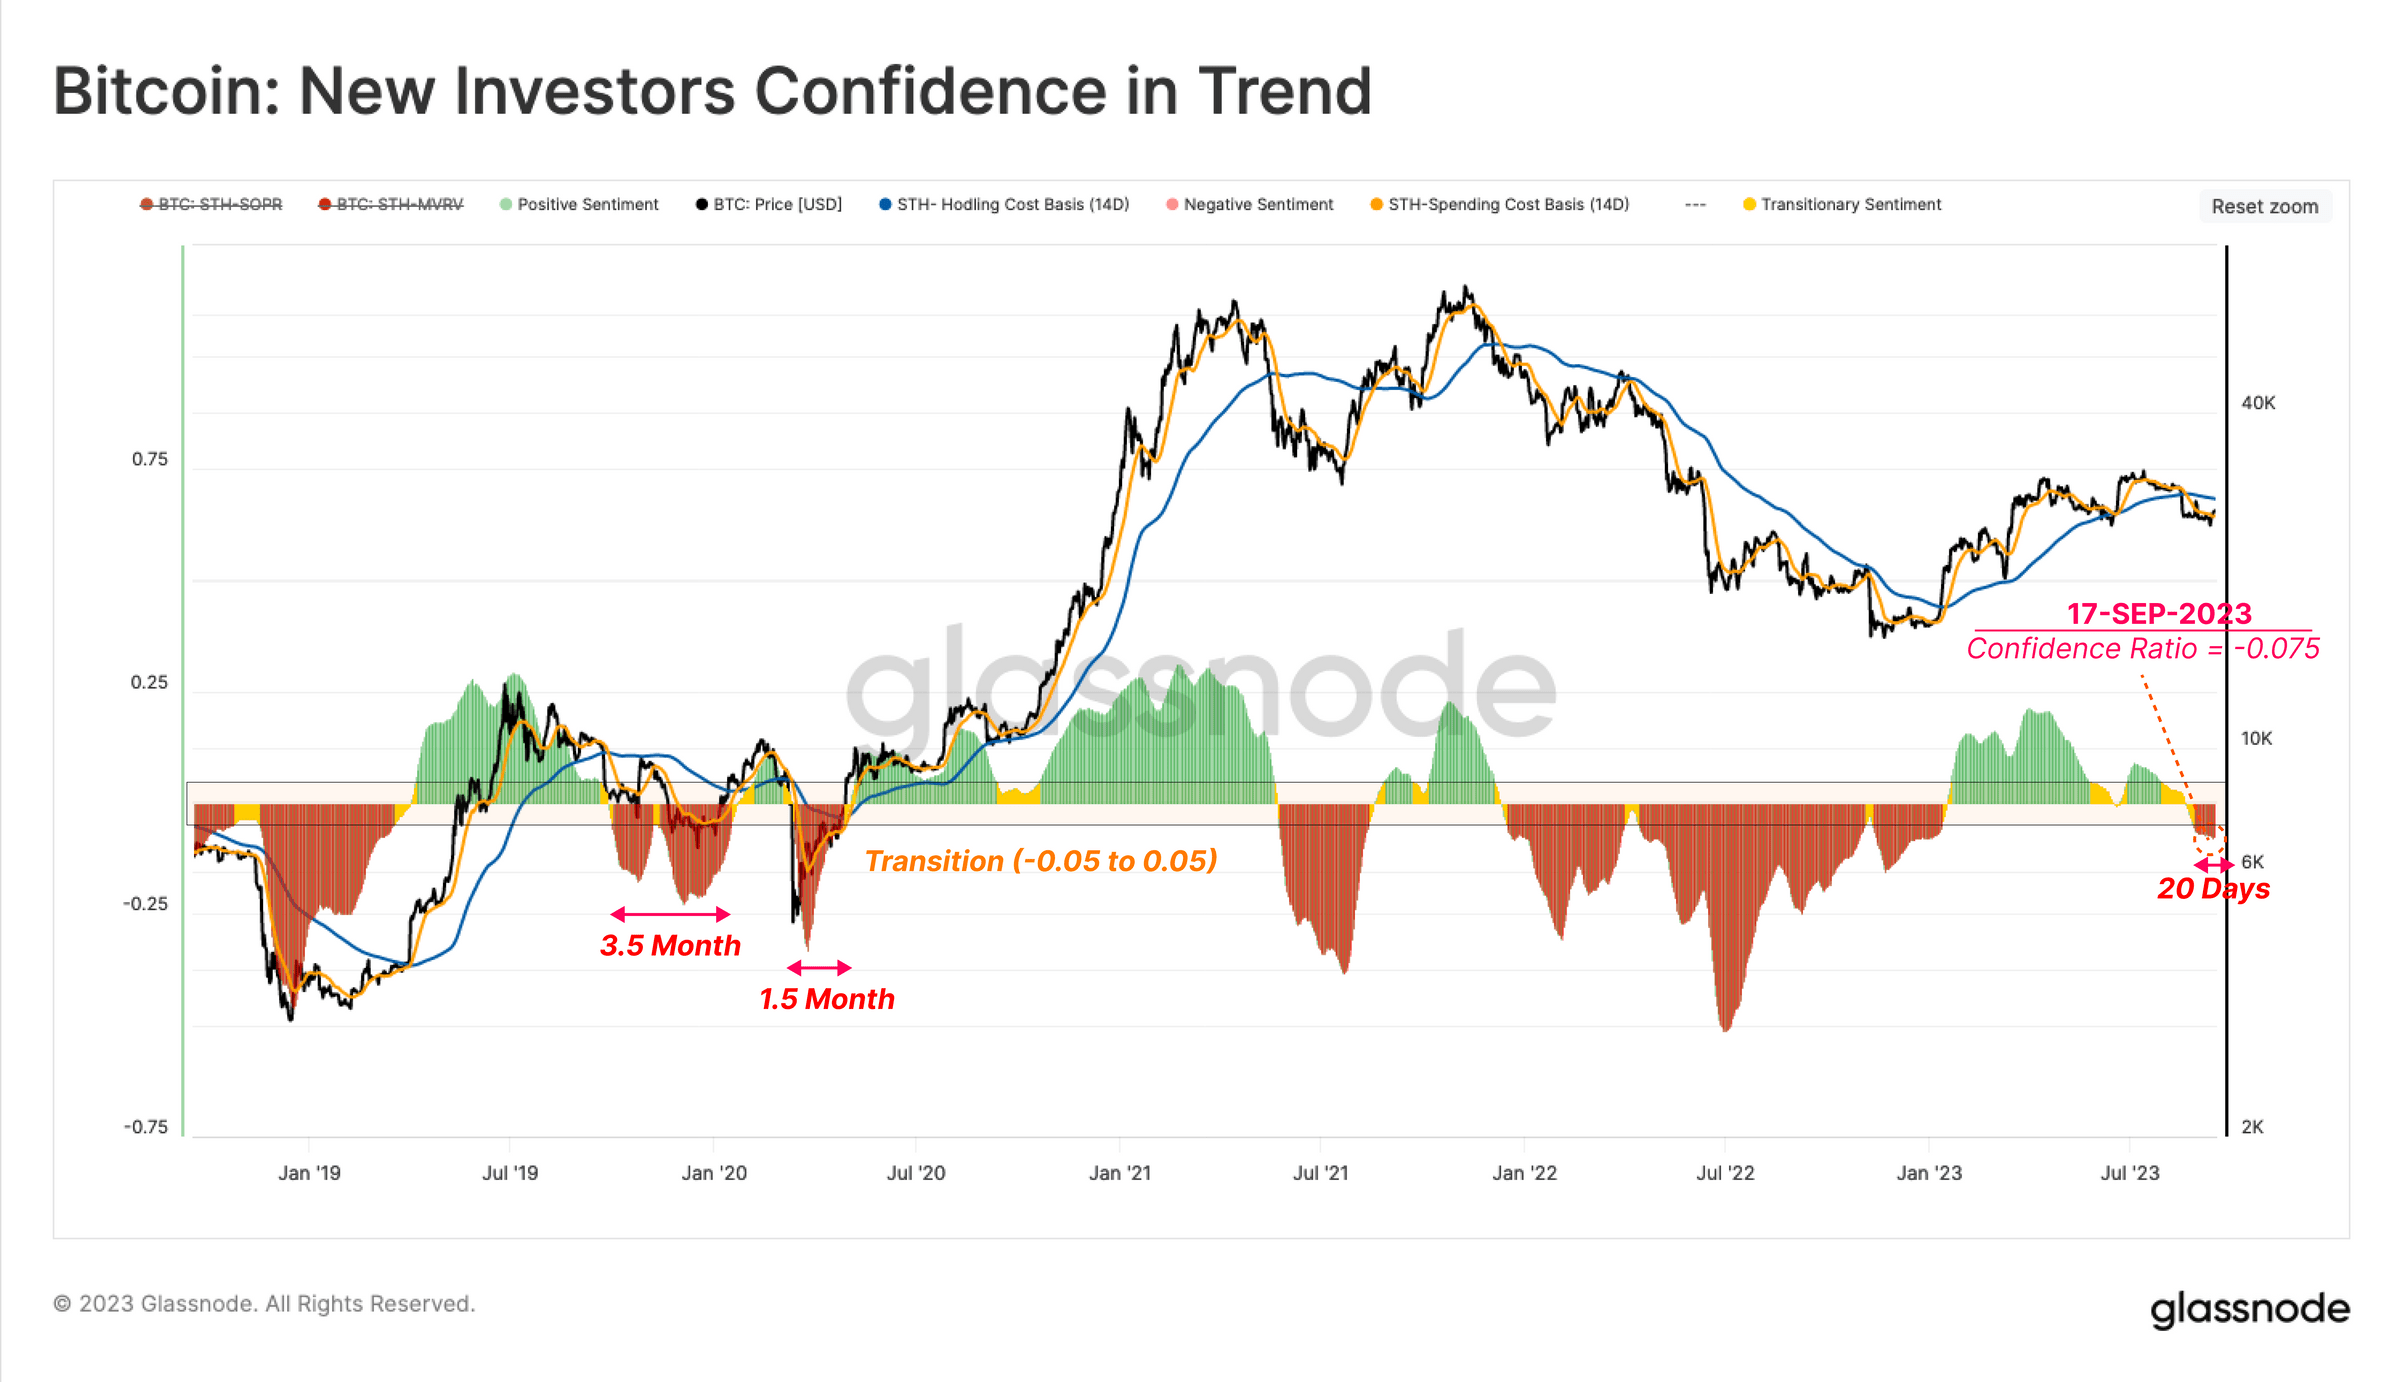 Investor confidence in the trend